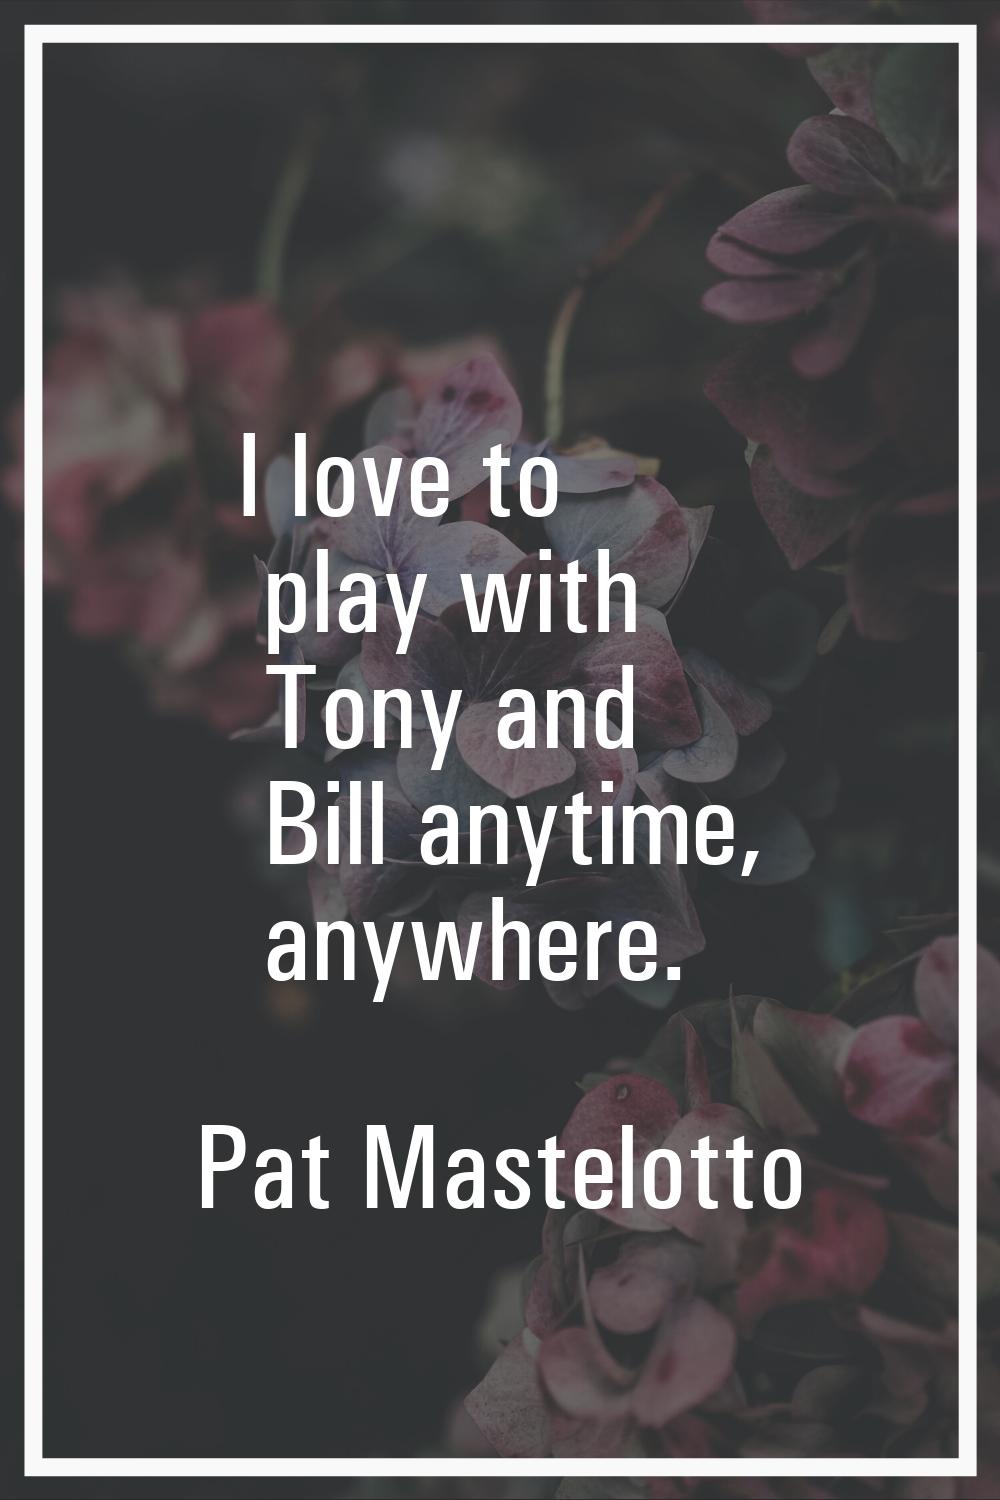 I love to play with Tony and Bill anytime, anywhere.